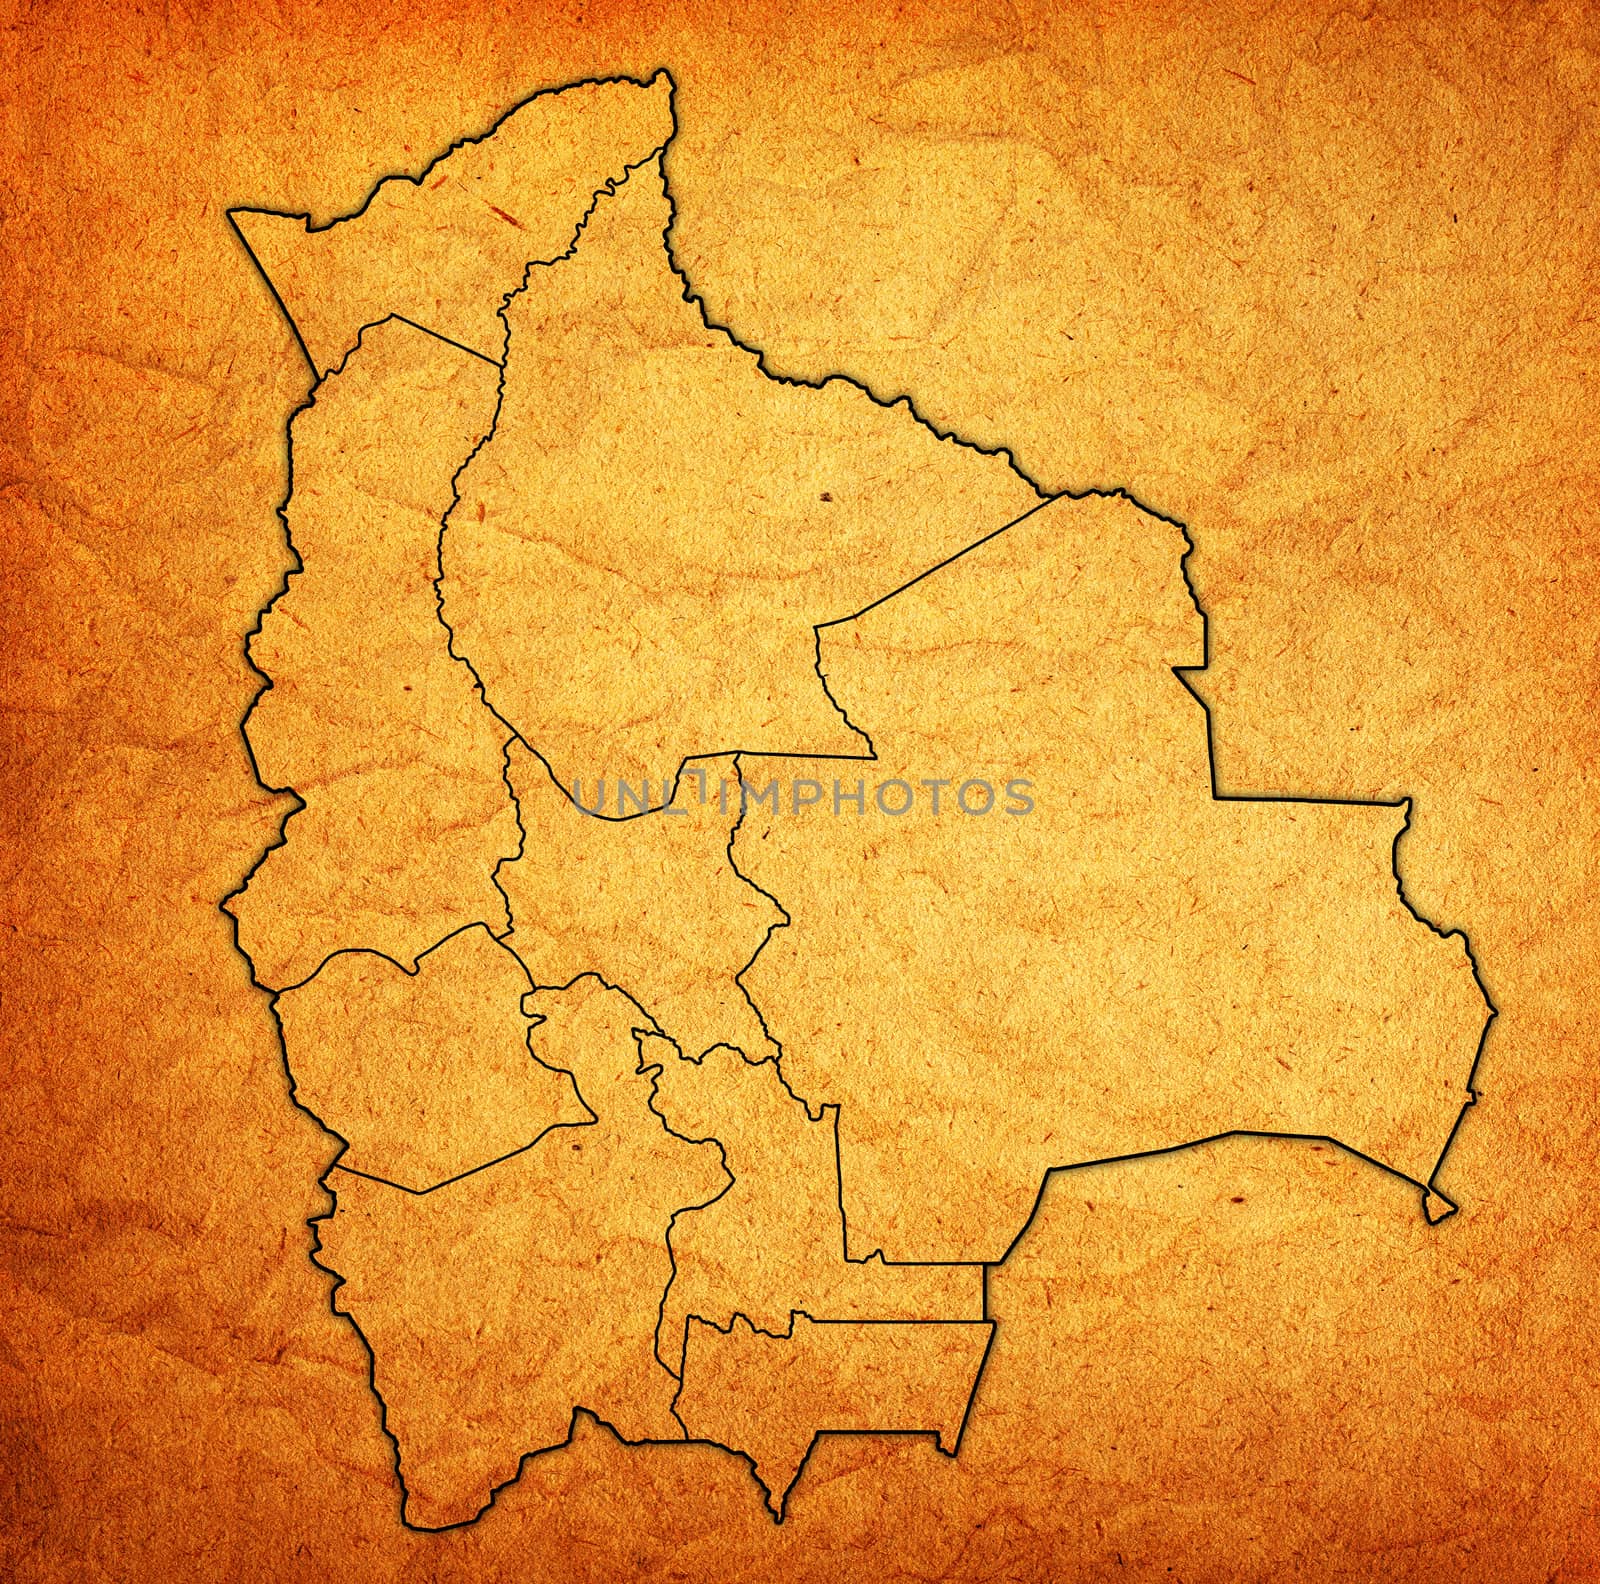 territories of regions on map with administrative divisions and borders of Bolivia with clipping path